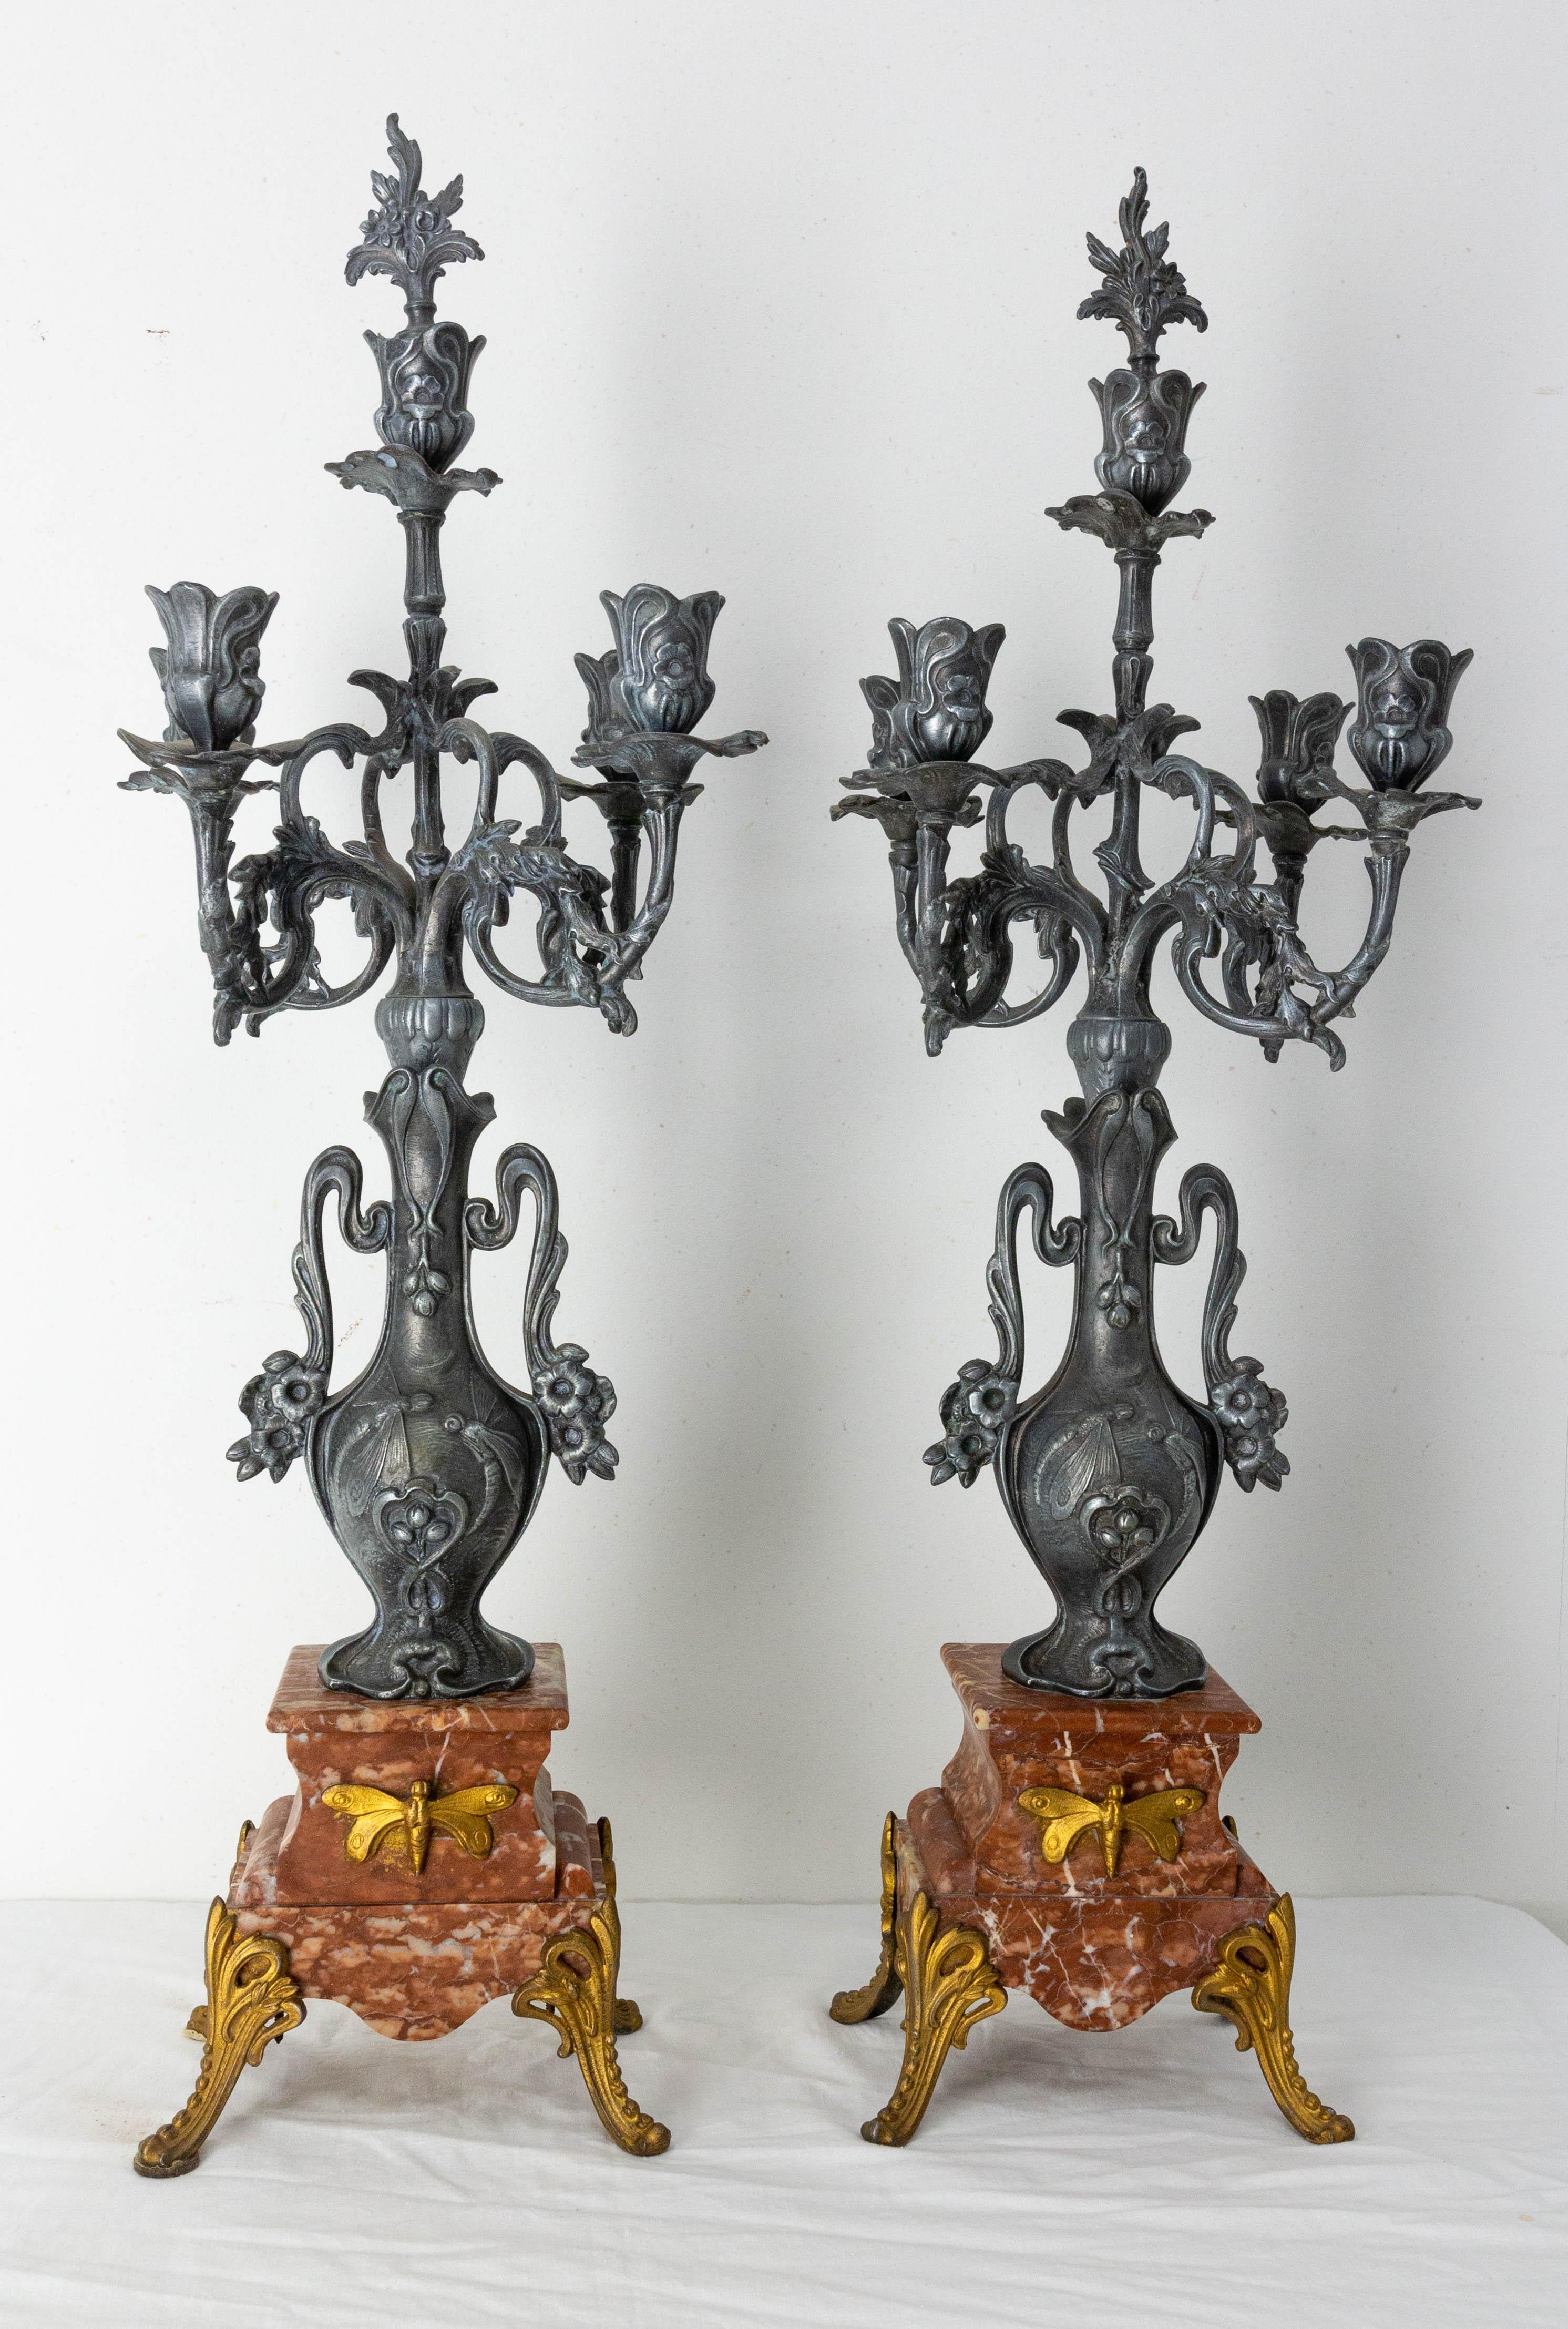 20th Century Pair of French Art Nouveau Candelabras  Marble Zamac Candleholder, Early 20th C. For Sale